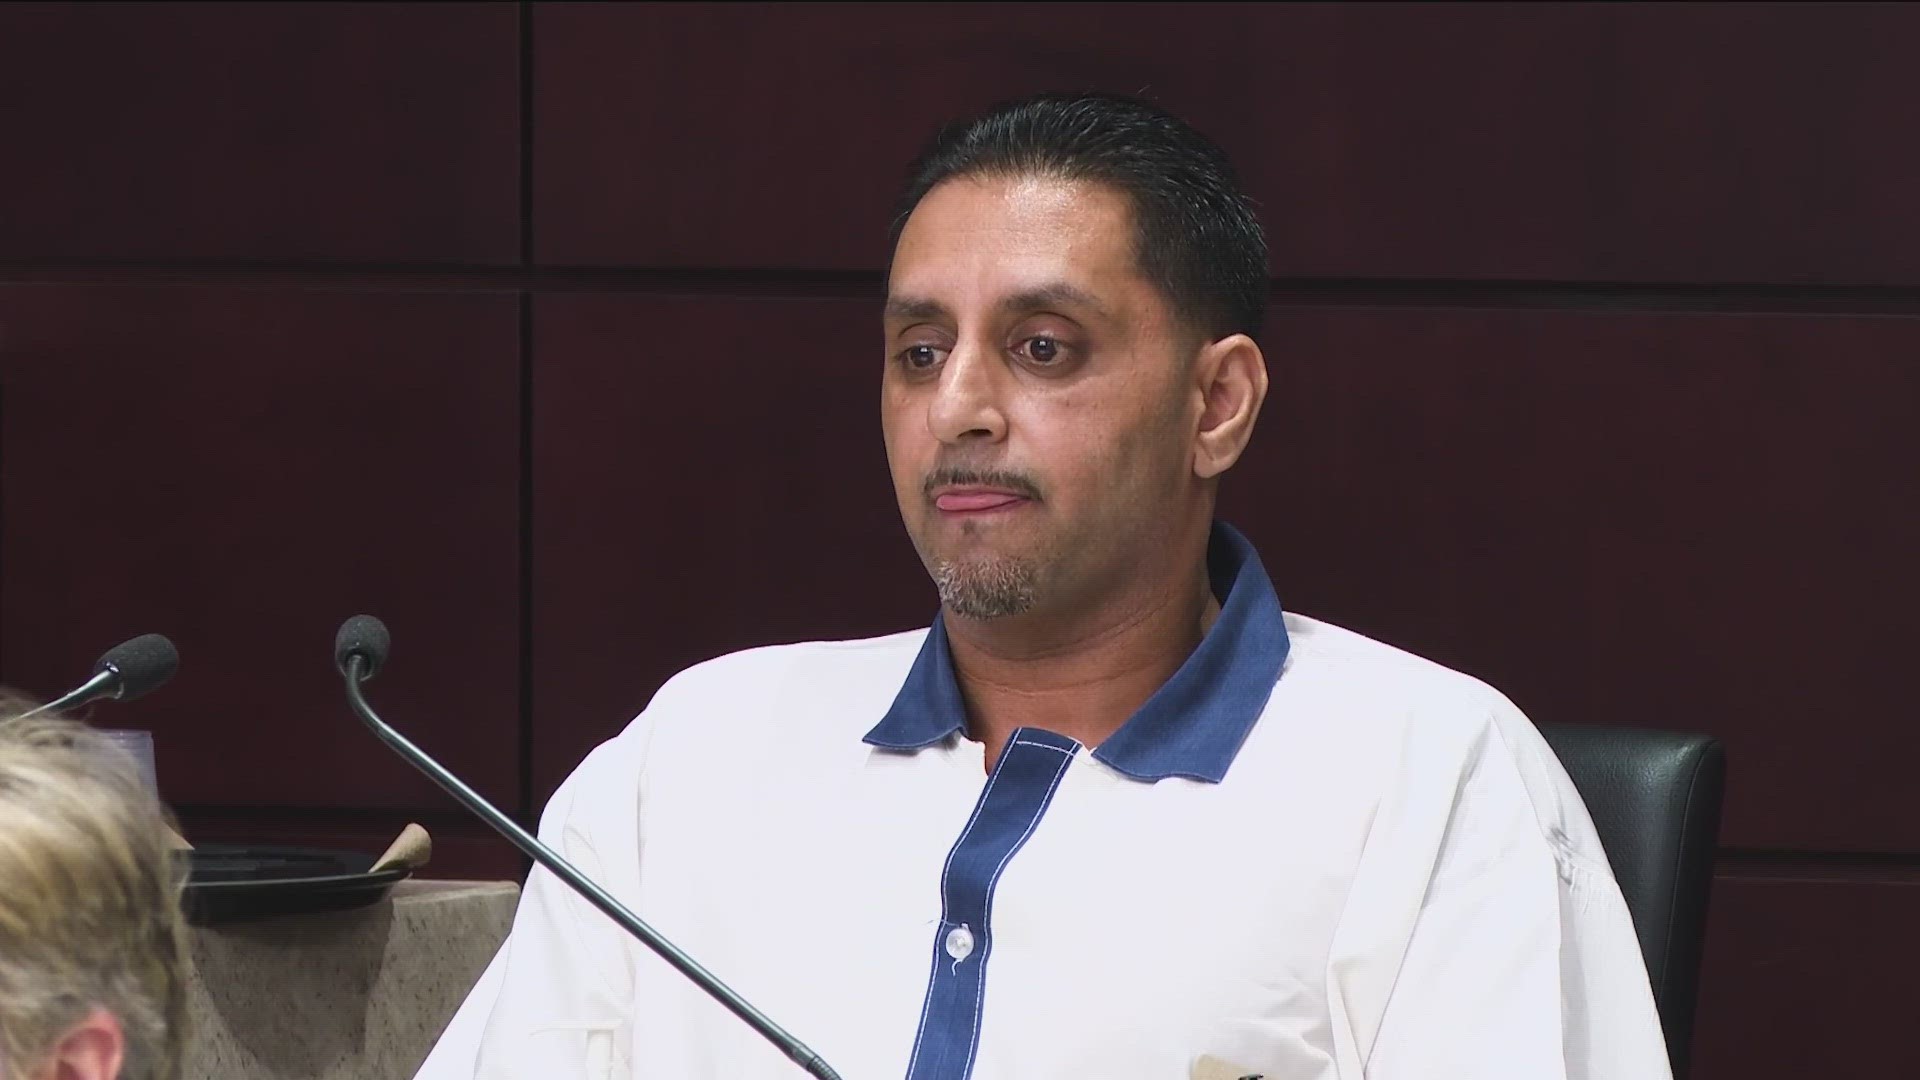 Sonny Bharadia says after 22 years behind bars his case is proof new evidence doesn’t always mean a new trial. He's hoping a Gwinnett County judge changes that.